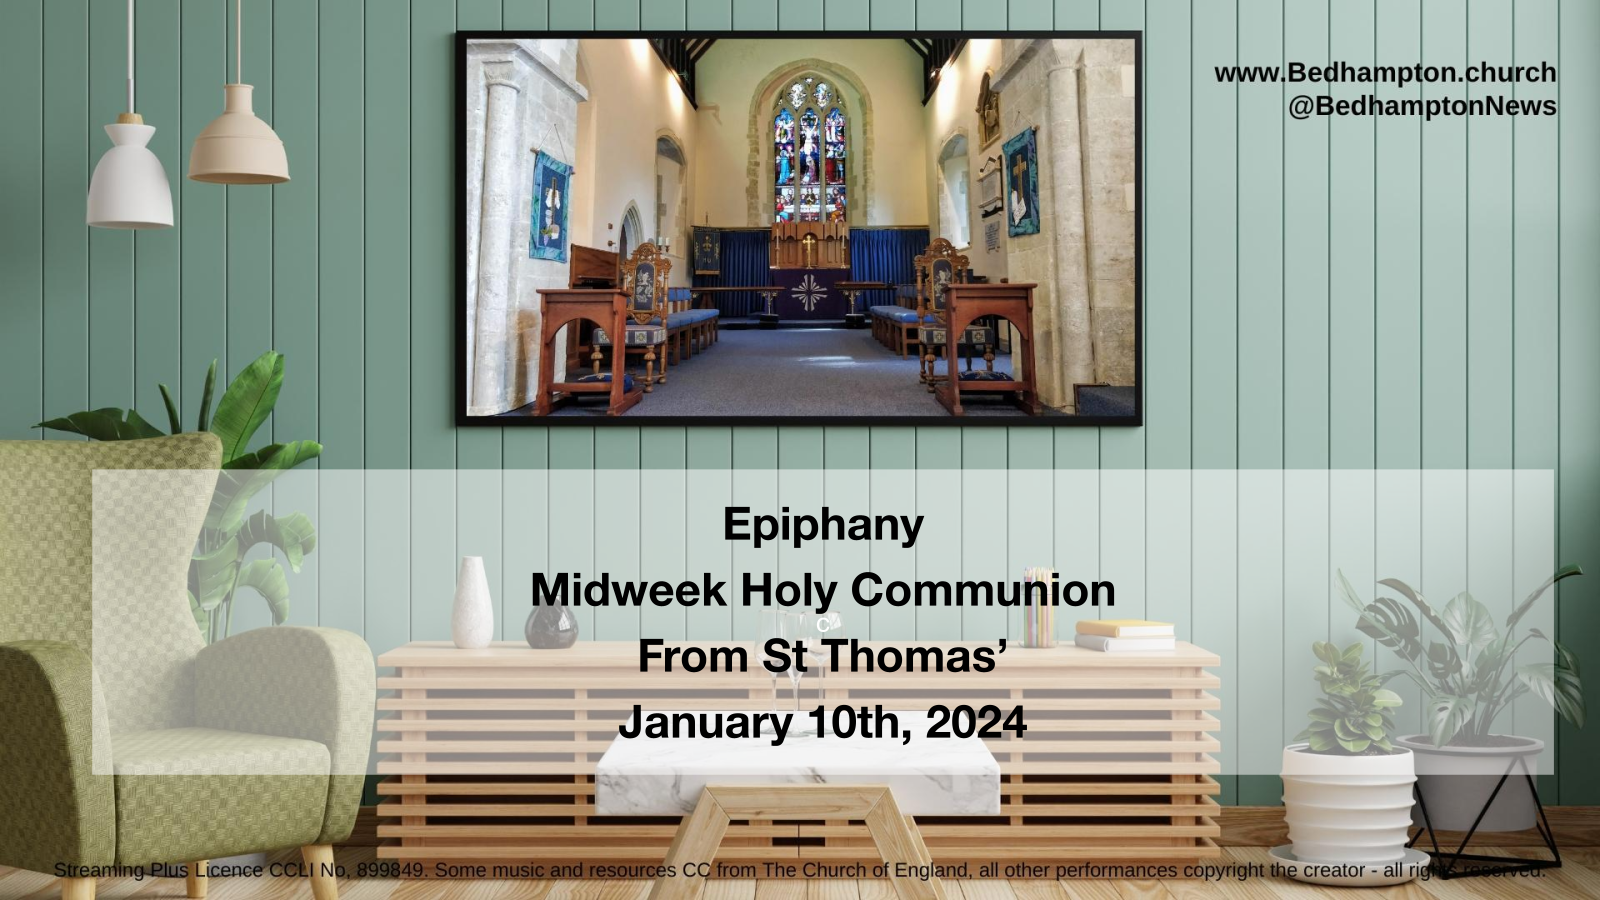 Midweek Holy Communion January 10th, 2024